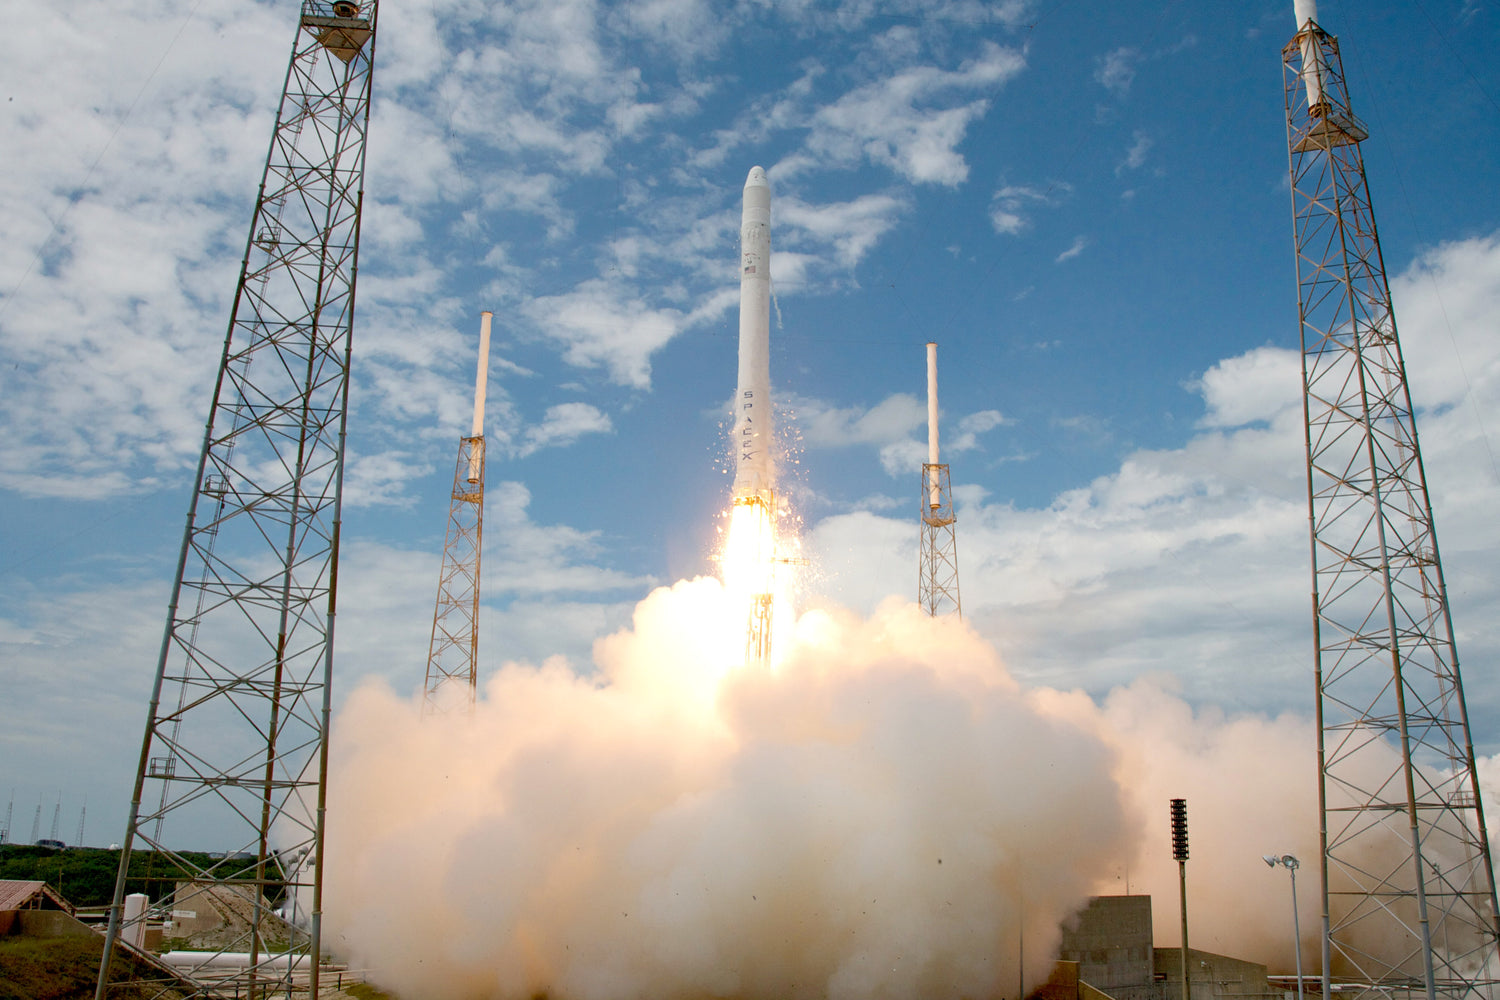 SpaceX's Falcon 9 rocket lifted off for the first time 10 years ago today